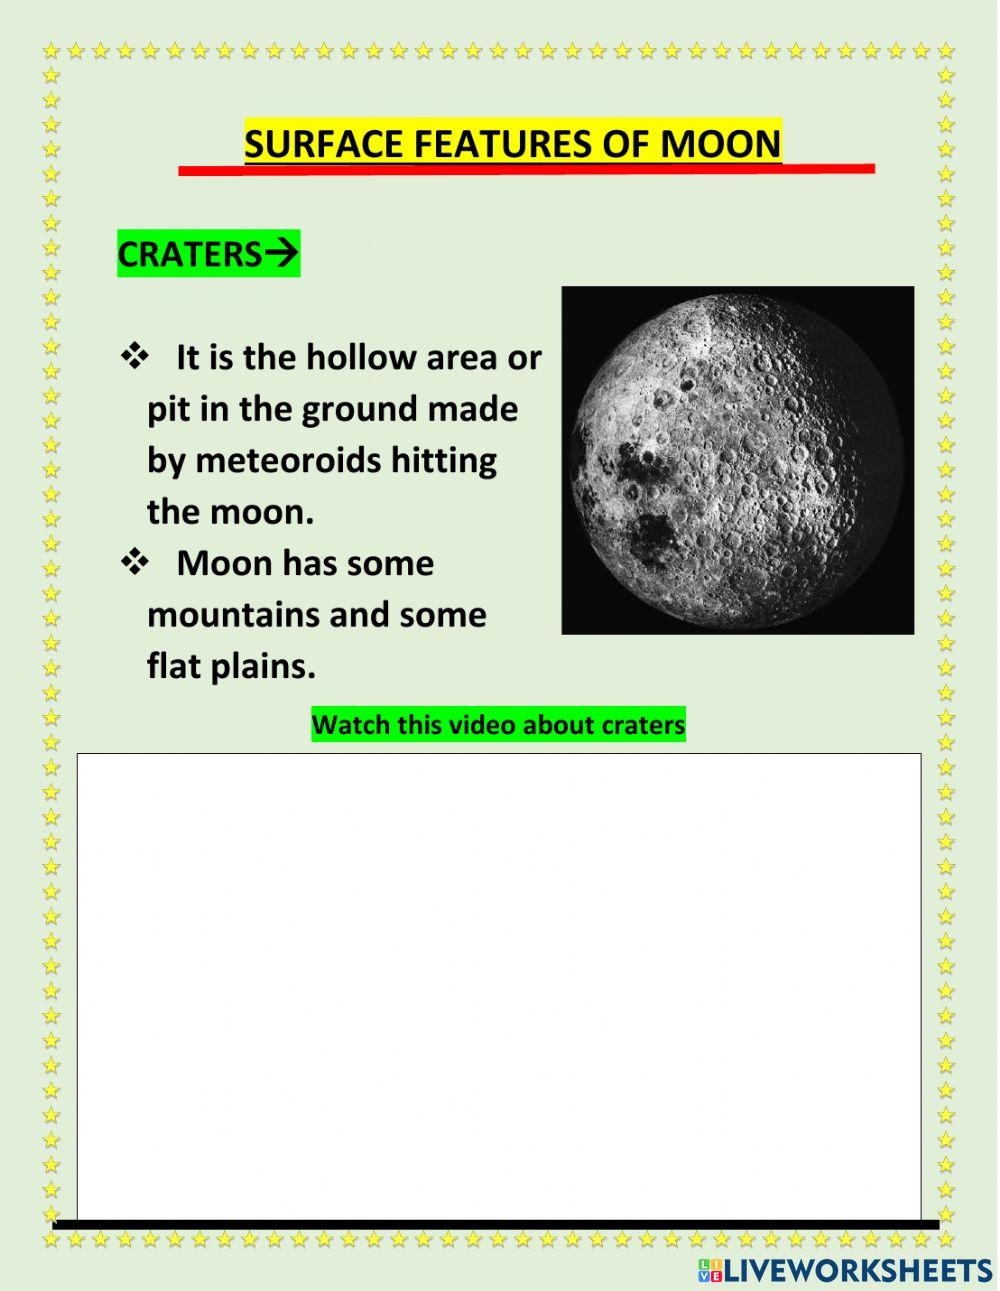 Chapter 10 lesson 2- EARTH AND MOON PART 1